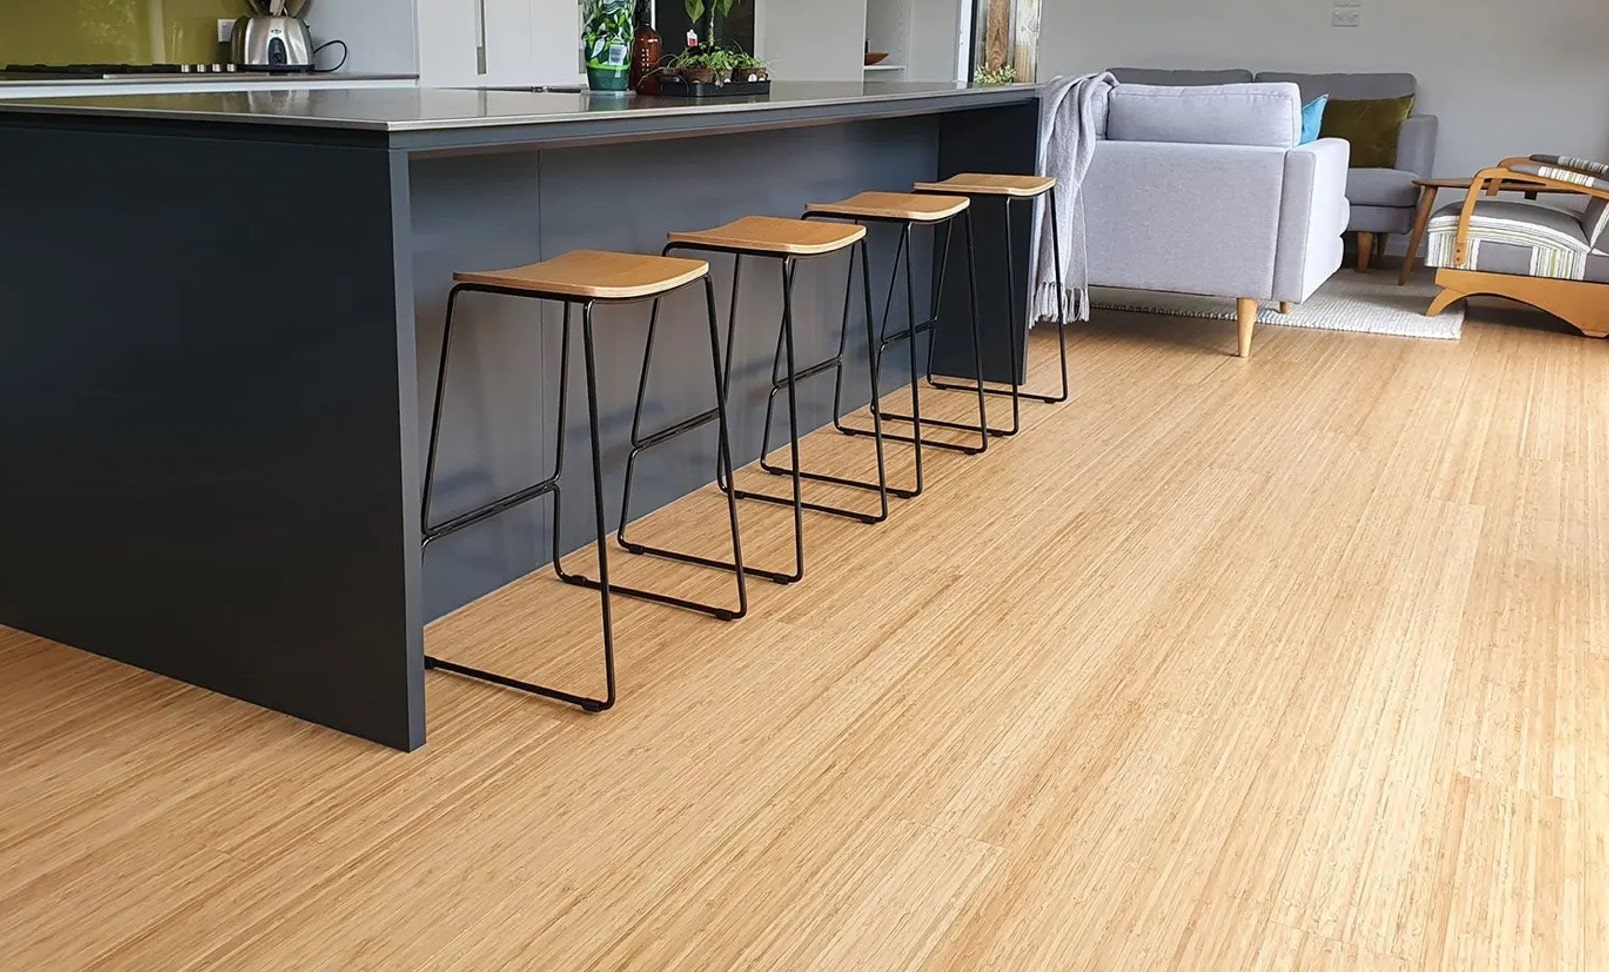 Photo of a dark grey kitchen island and stools, with a focus on the light wood grain flooring in front of it.